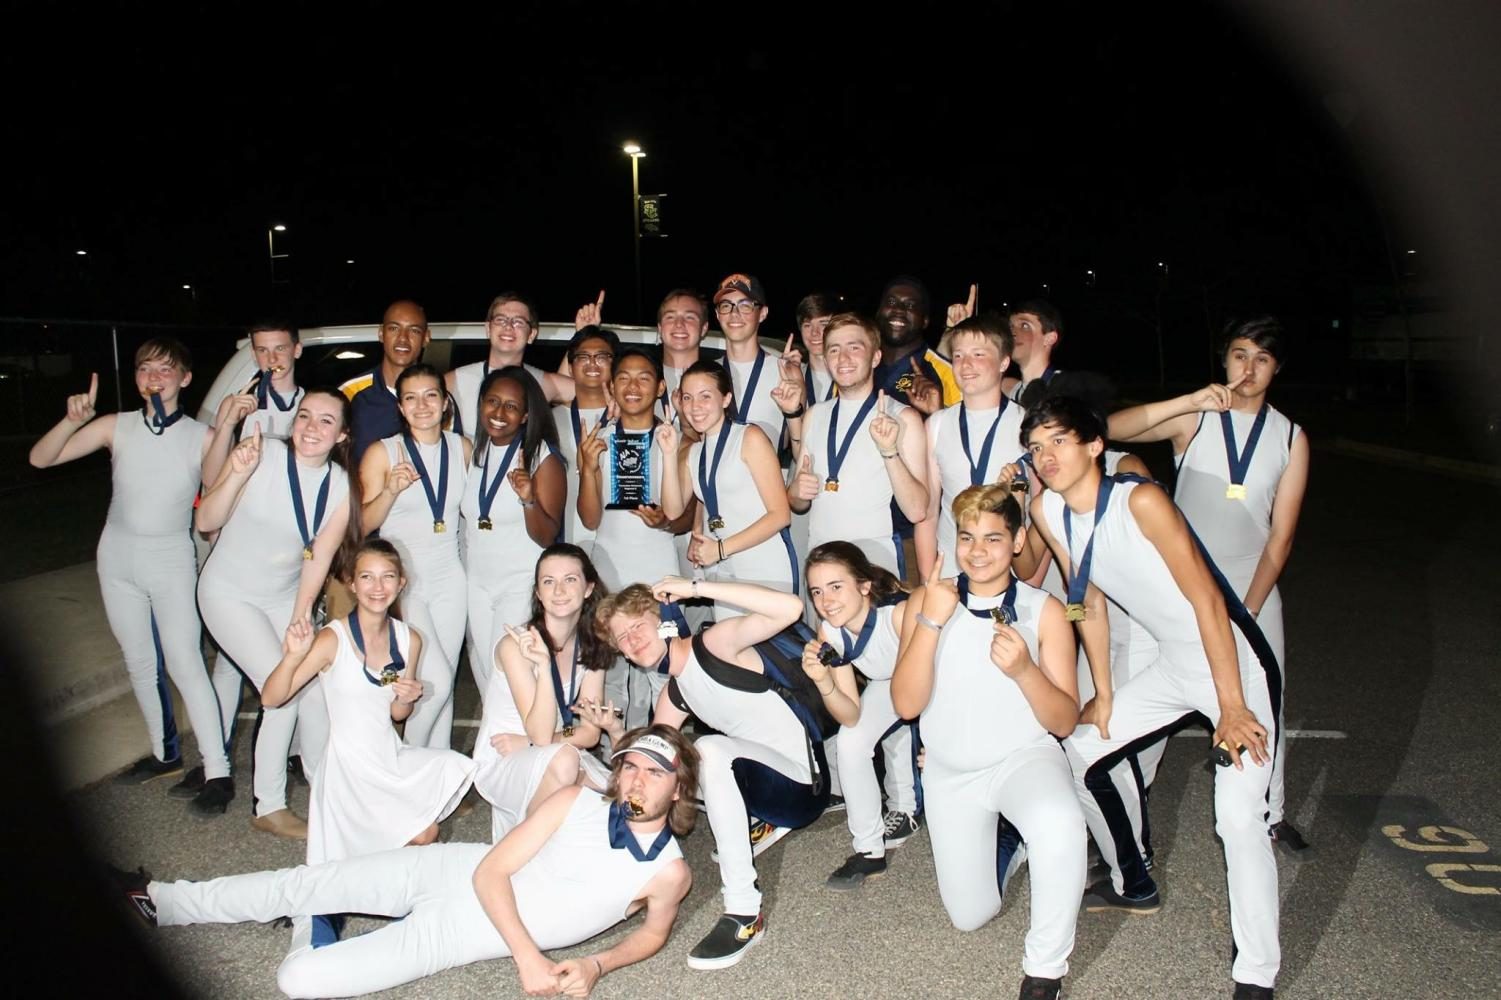 Indoor drumline celebrates their first place win with a trophy and gold medals for all team members in the South County High parking lot.
